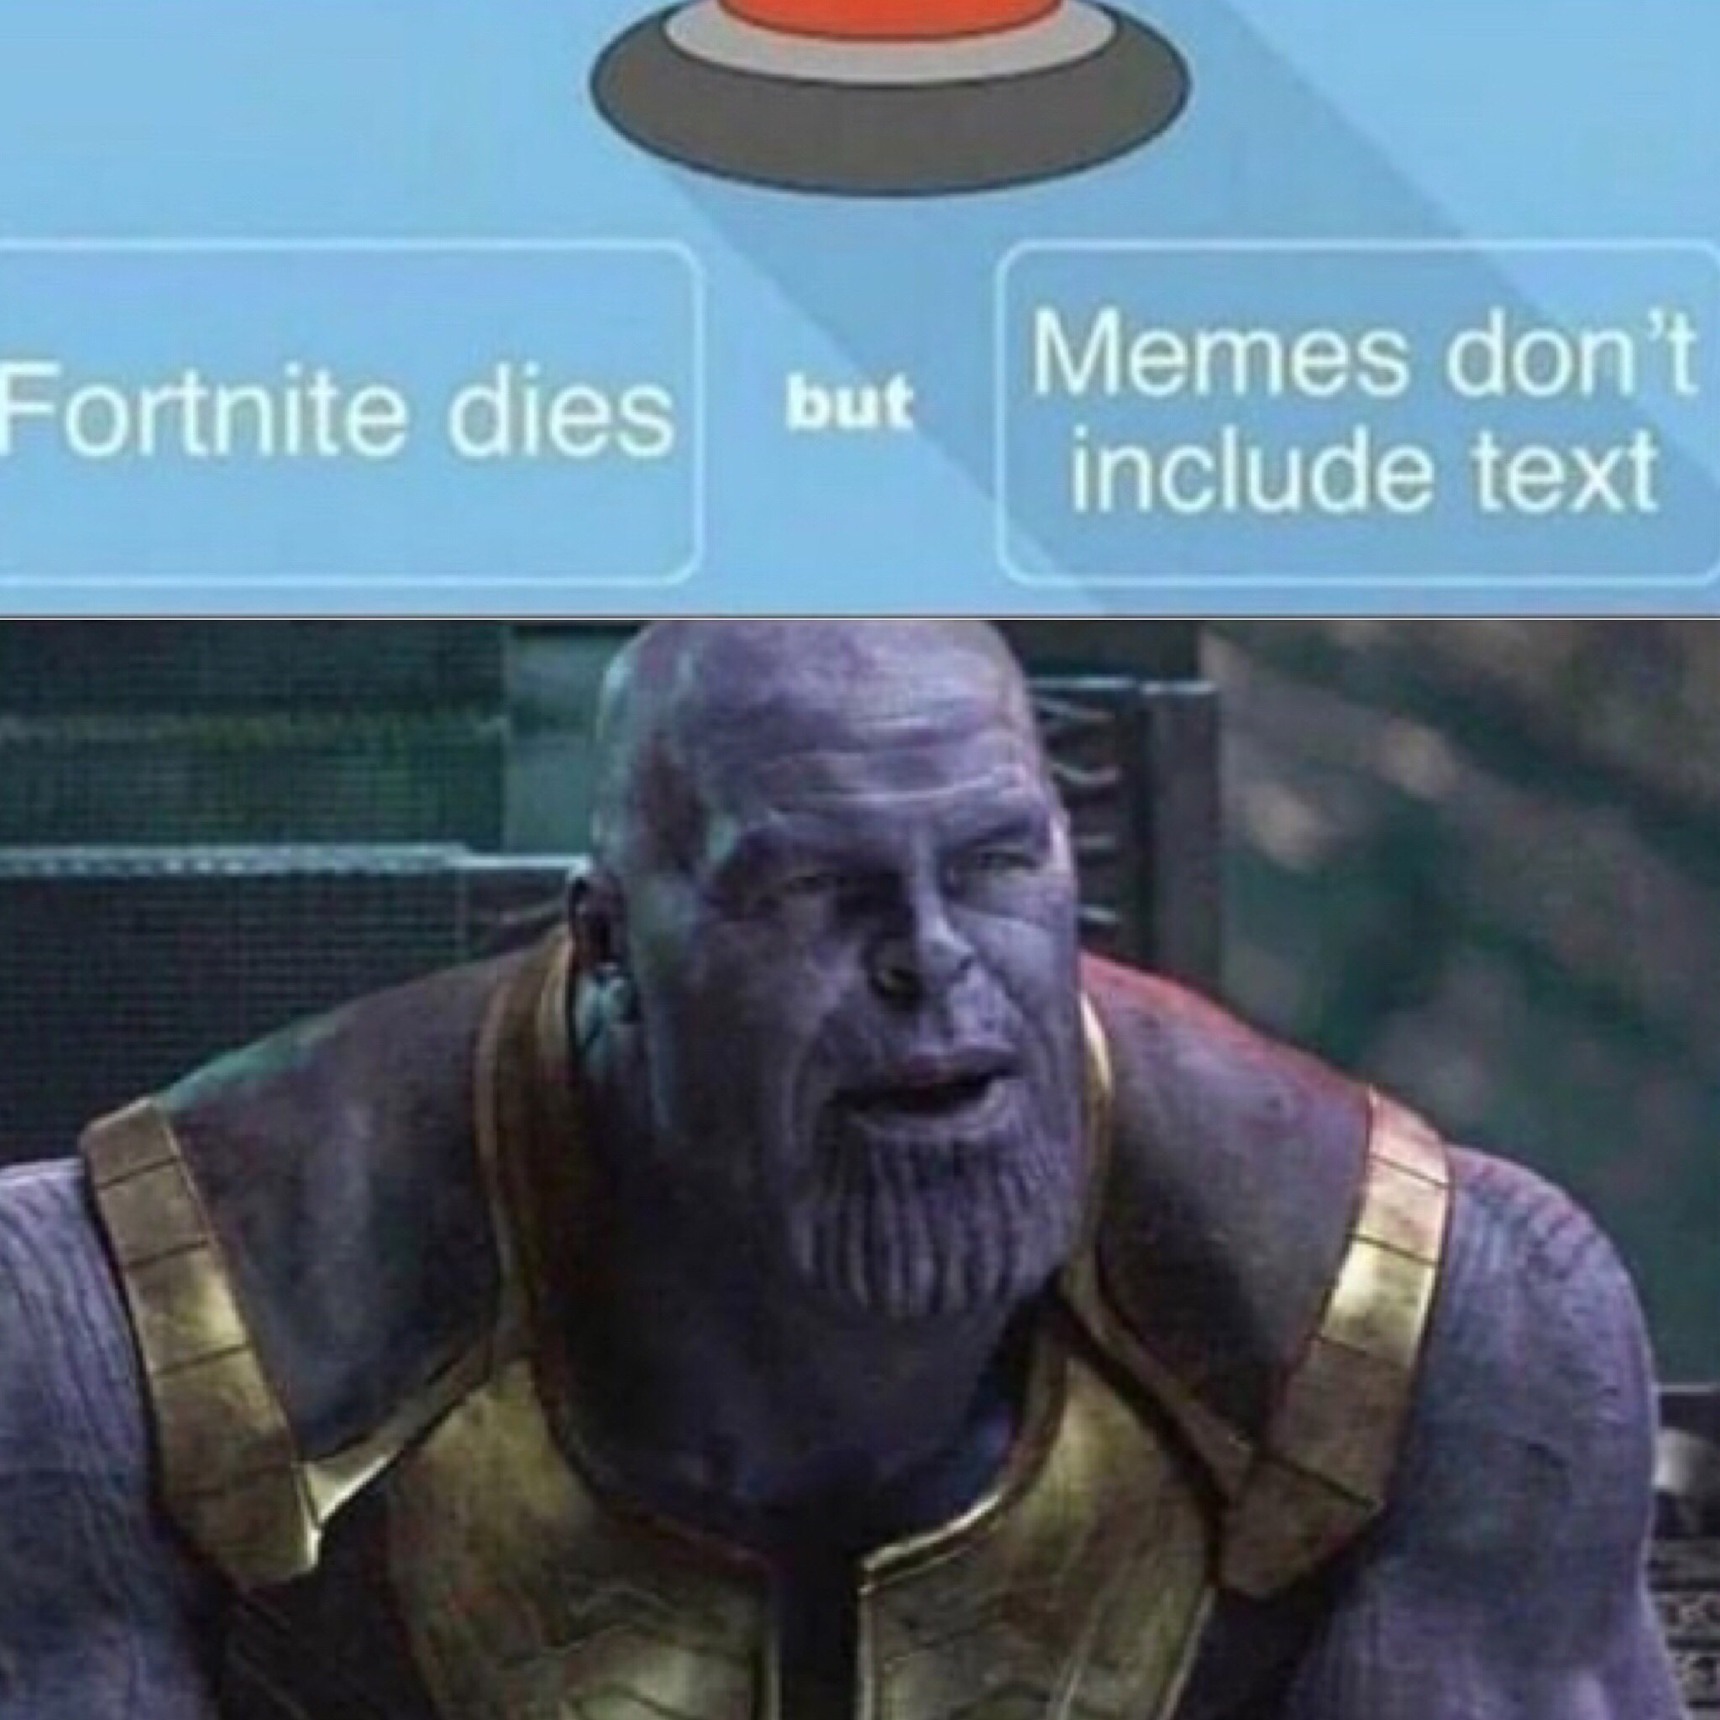 this is a message for the normies. dread it run from it fortnite dies all the same - meme